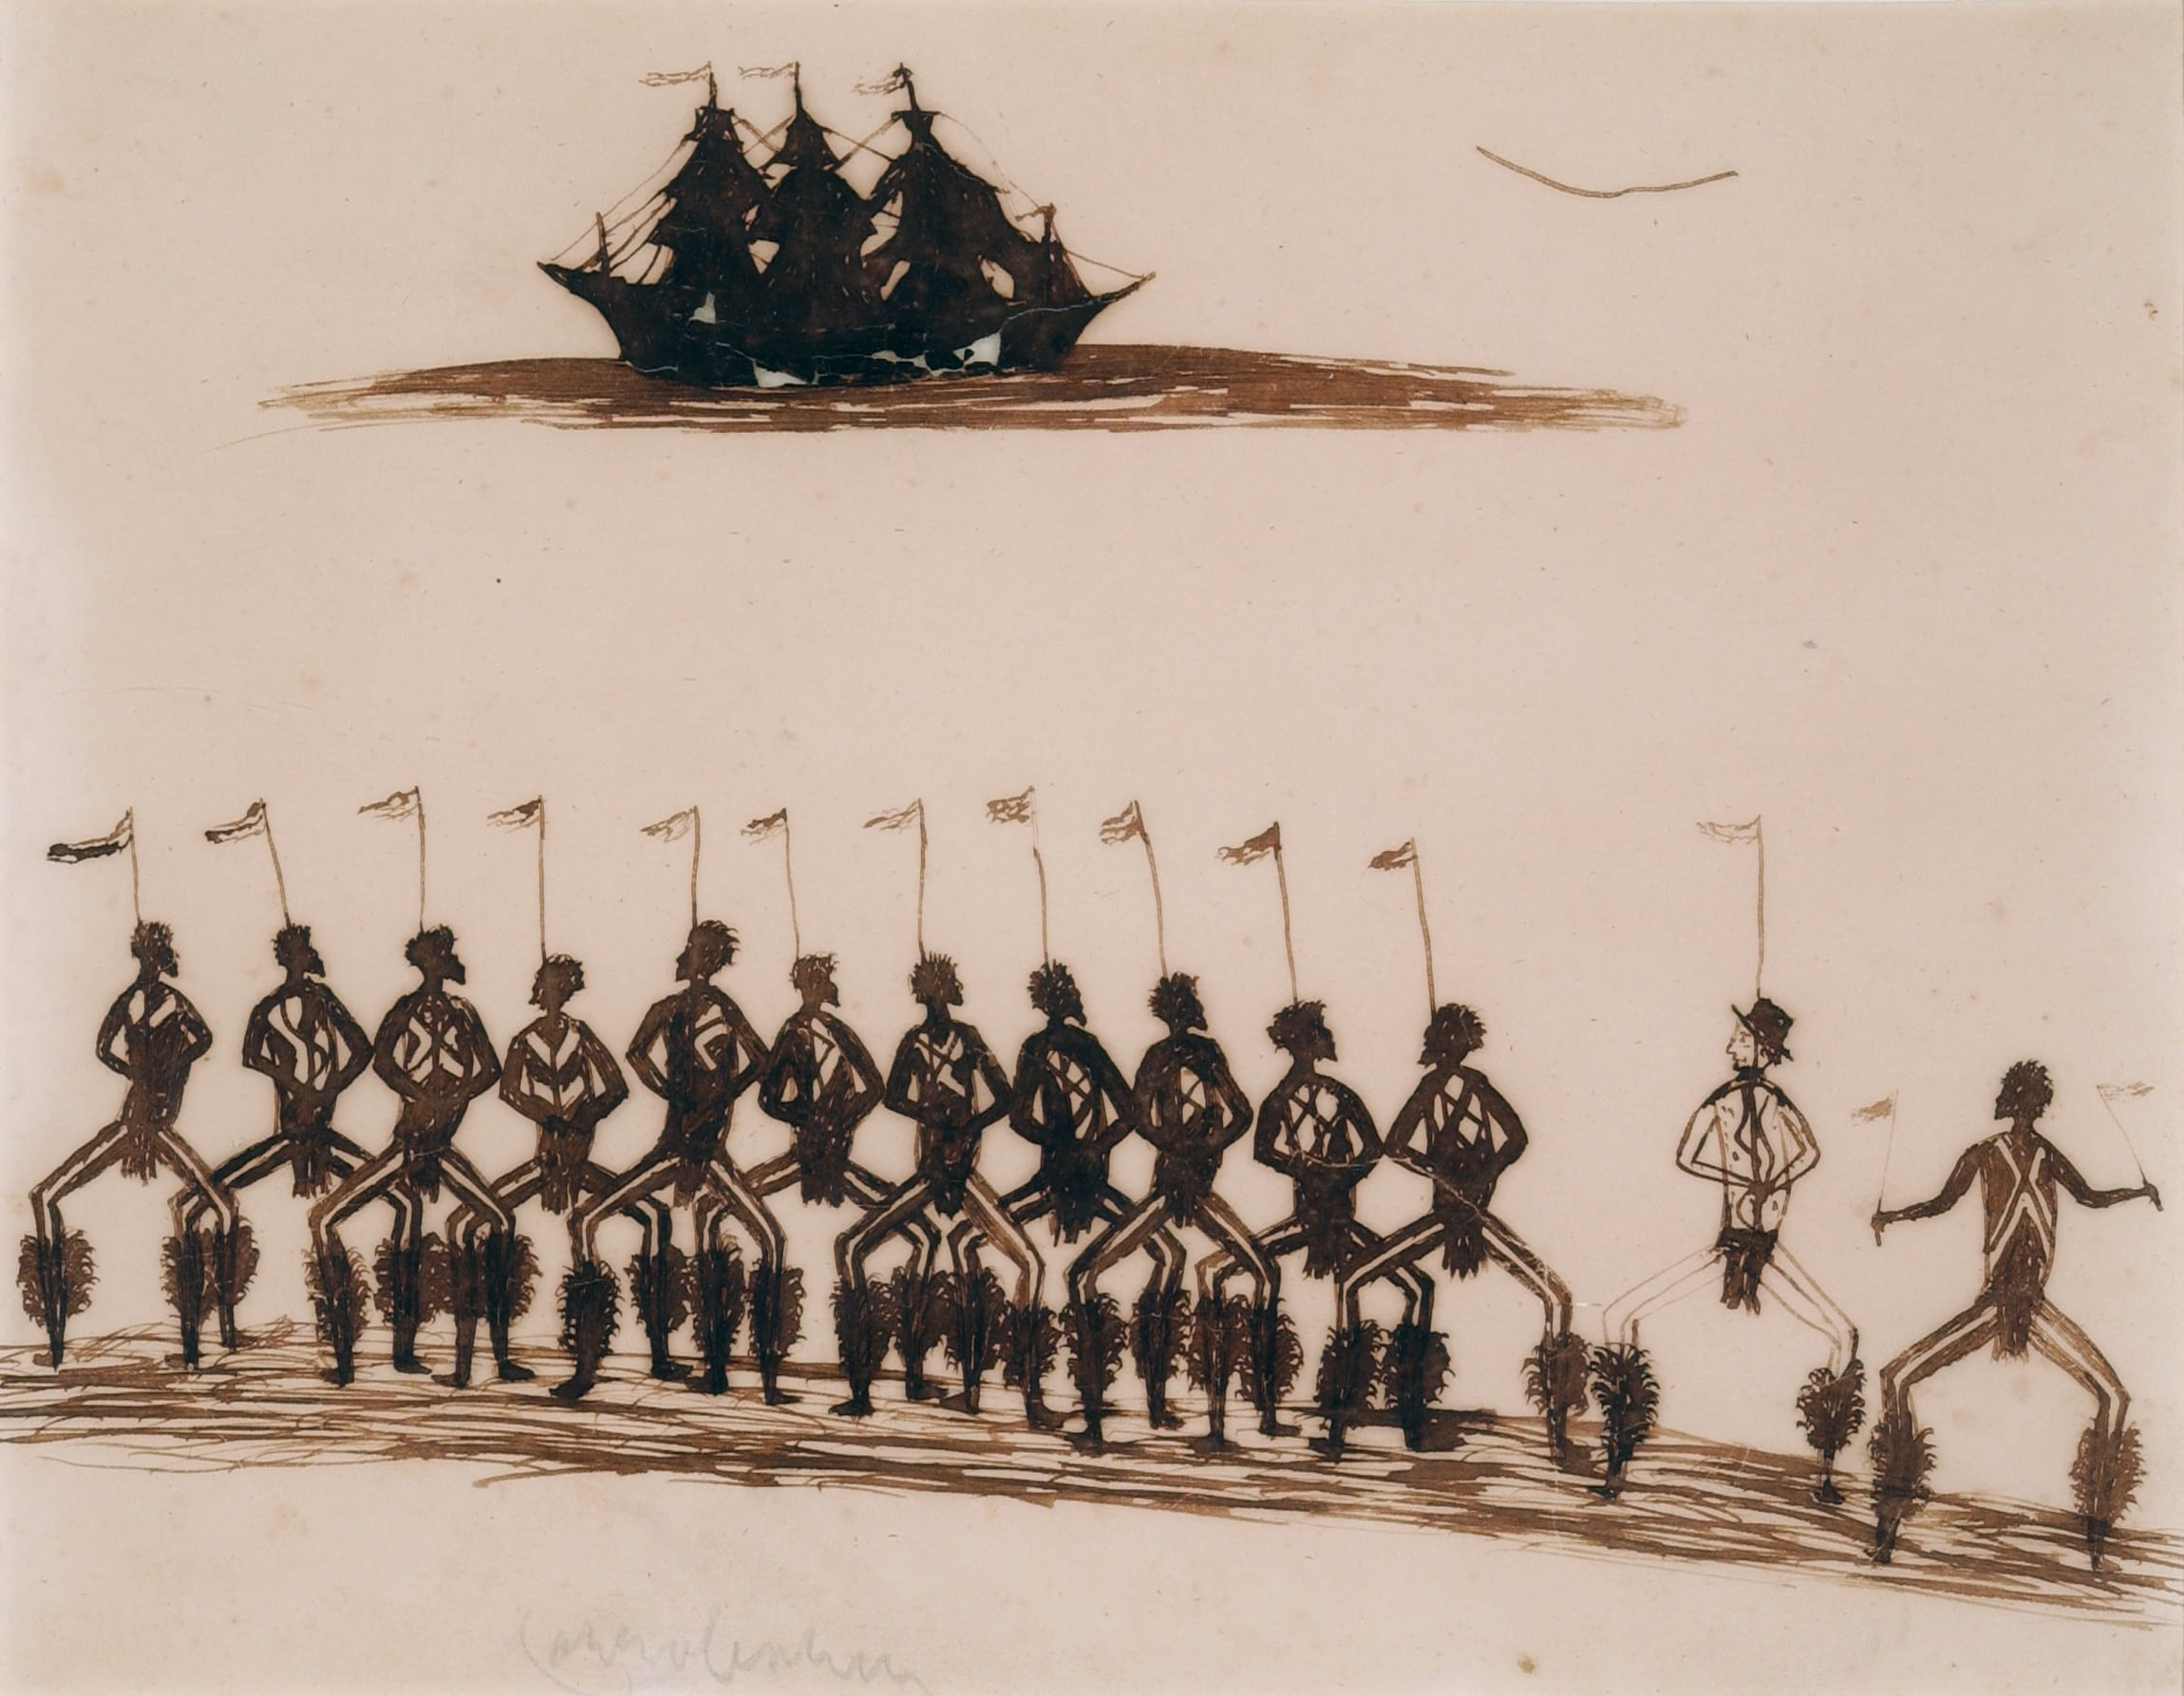 Corroboree, ink on paper by Tommy McRae, University of Melbourne Archives, Foord Family Collection, 1961.0008.00001